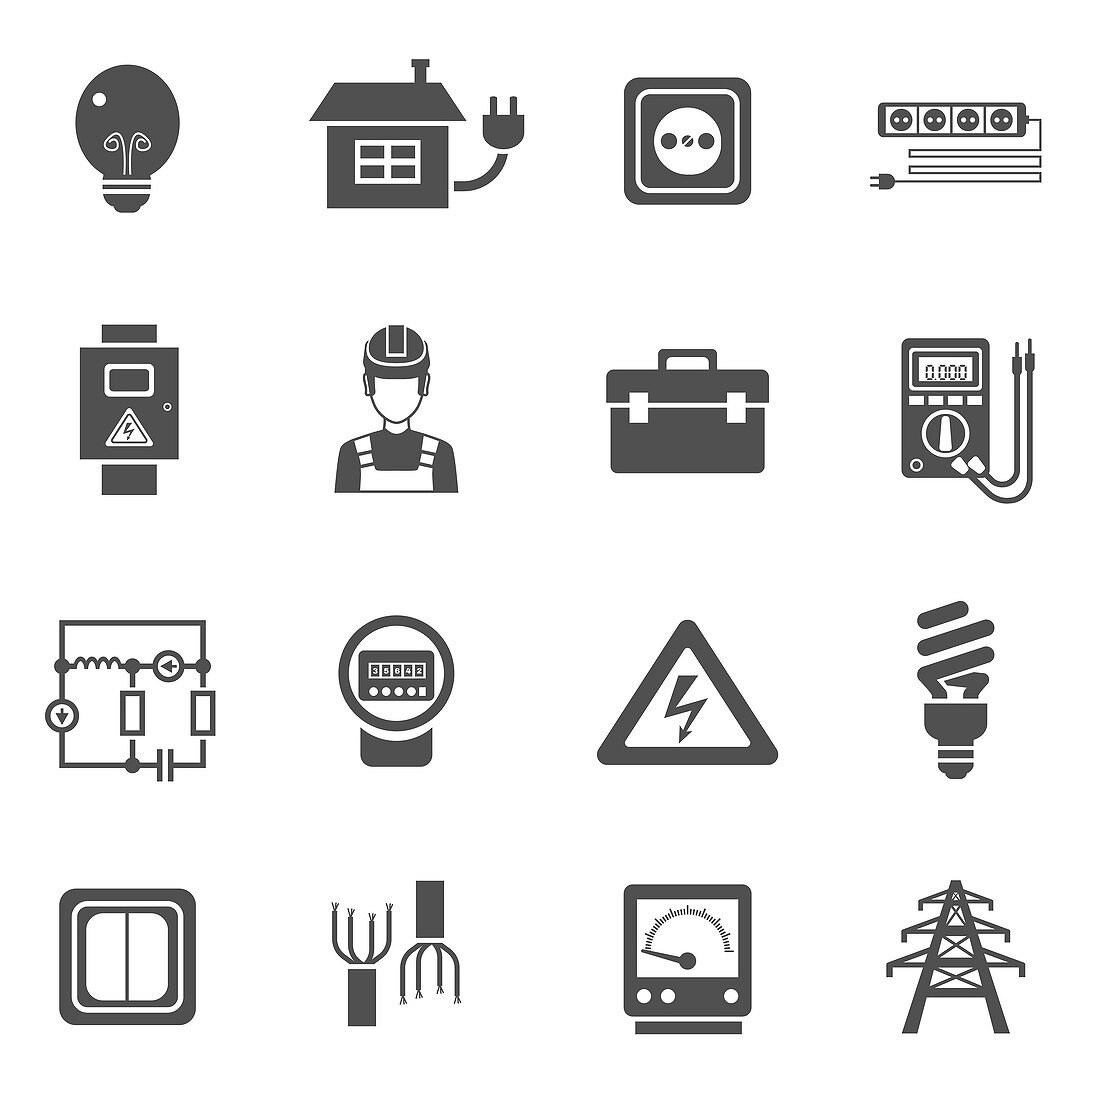 Electricity icons, illustration